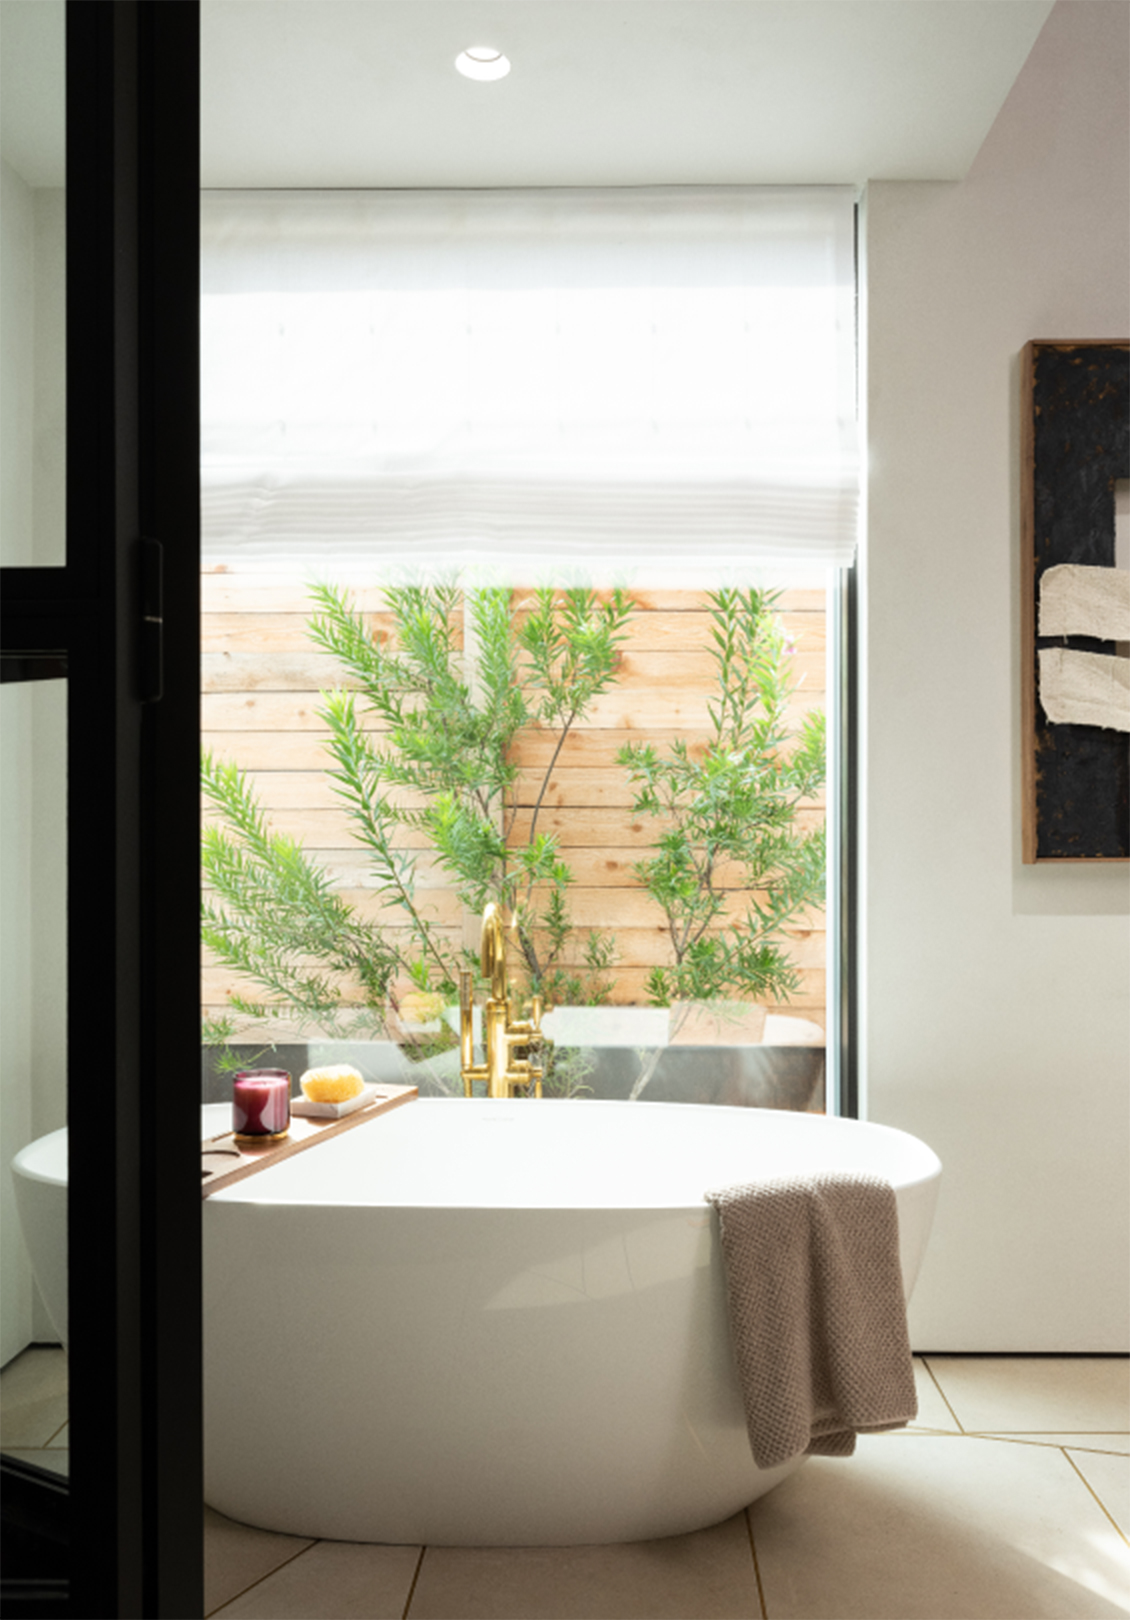 Light-filtering roman shades over a serene bath full of natural light in the daytime